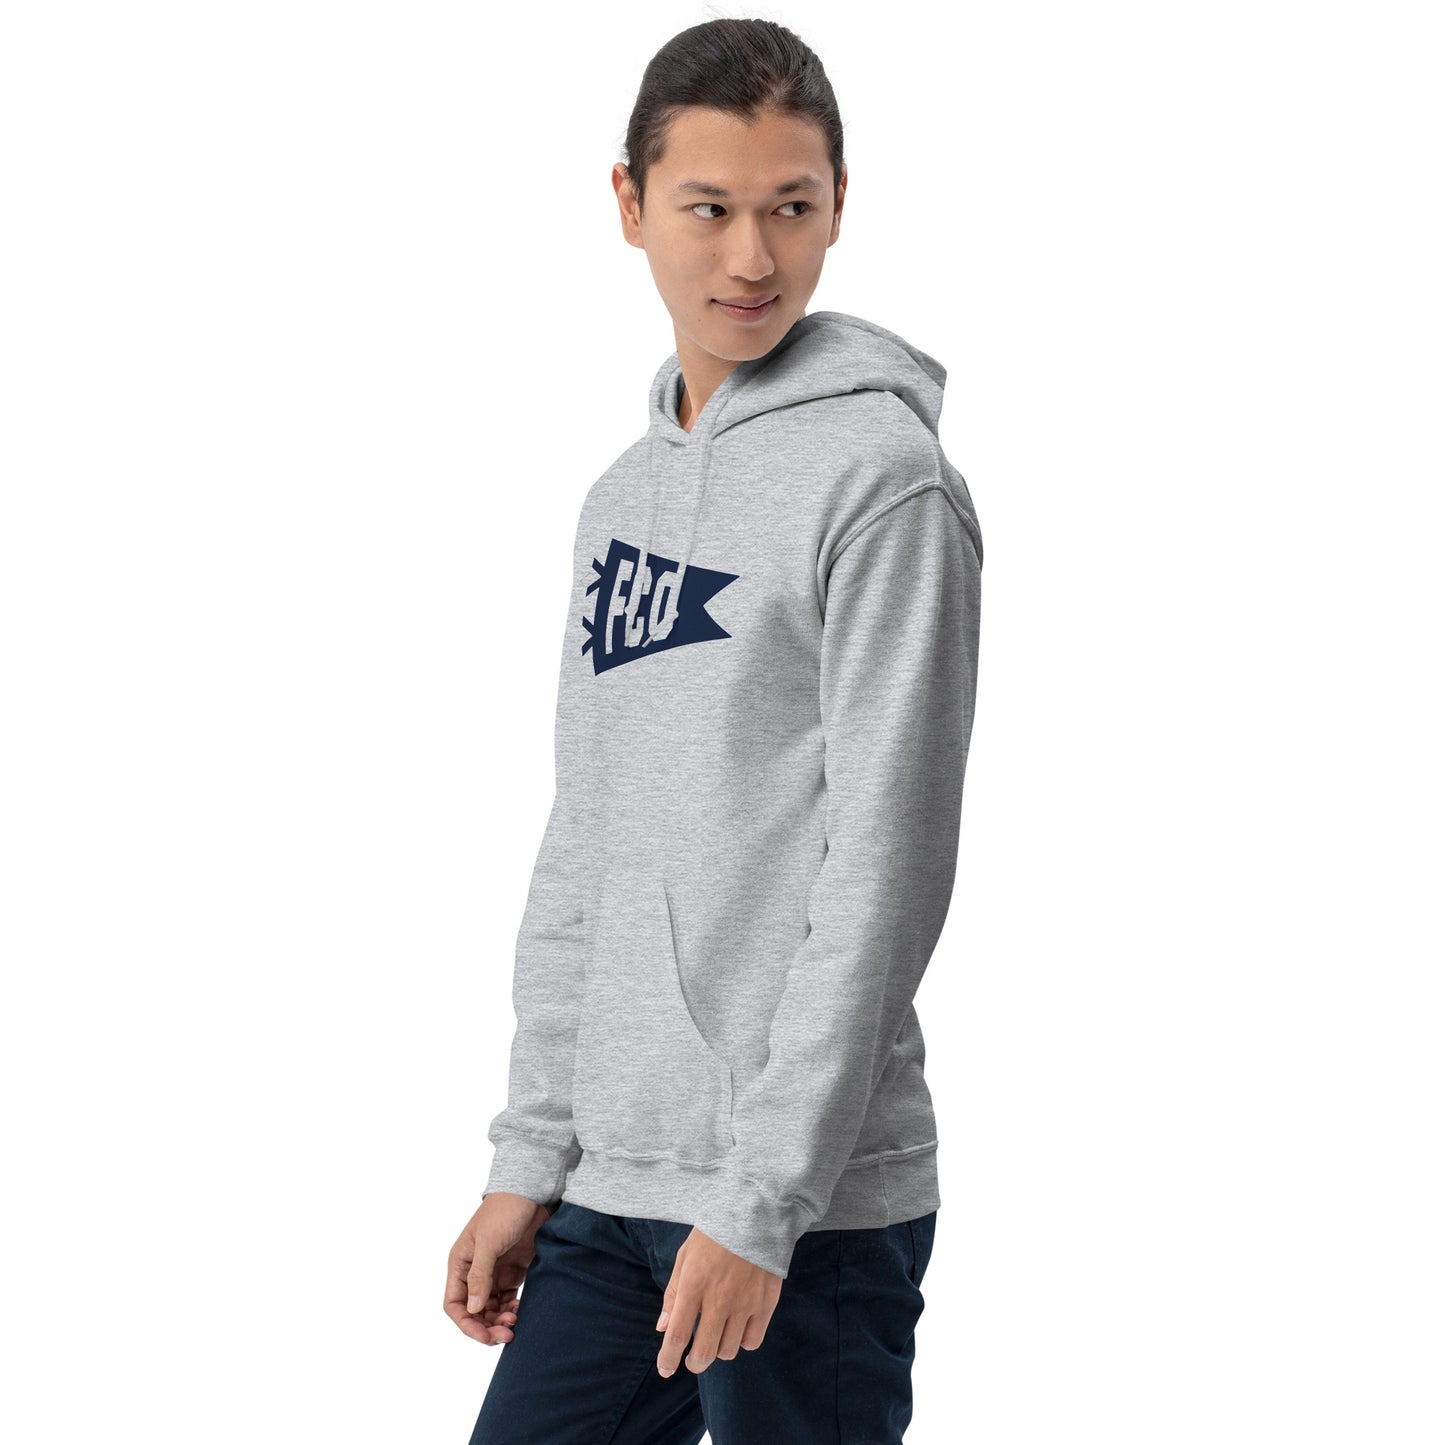 Airport Code Unisex Hoodie - Navy Blue Graphic • FCO Rome • YHM Designs - Image 10